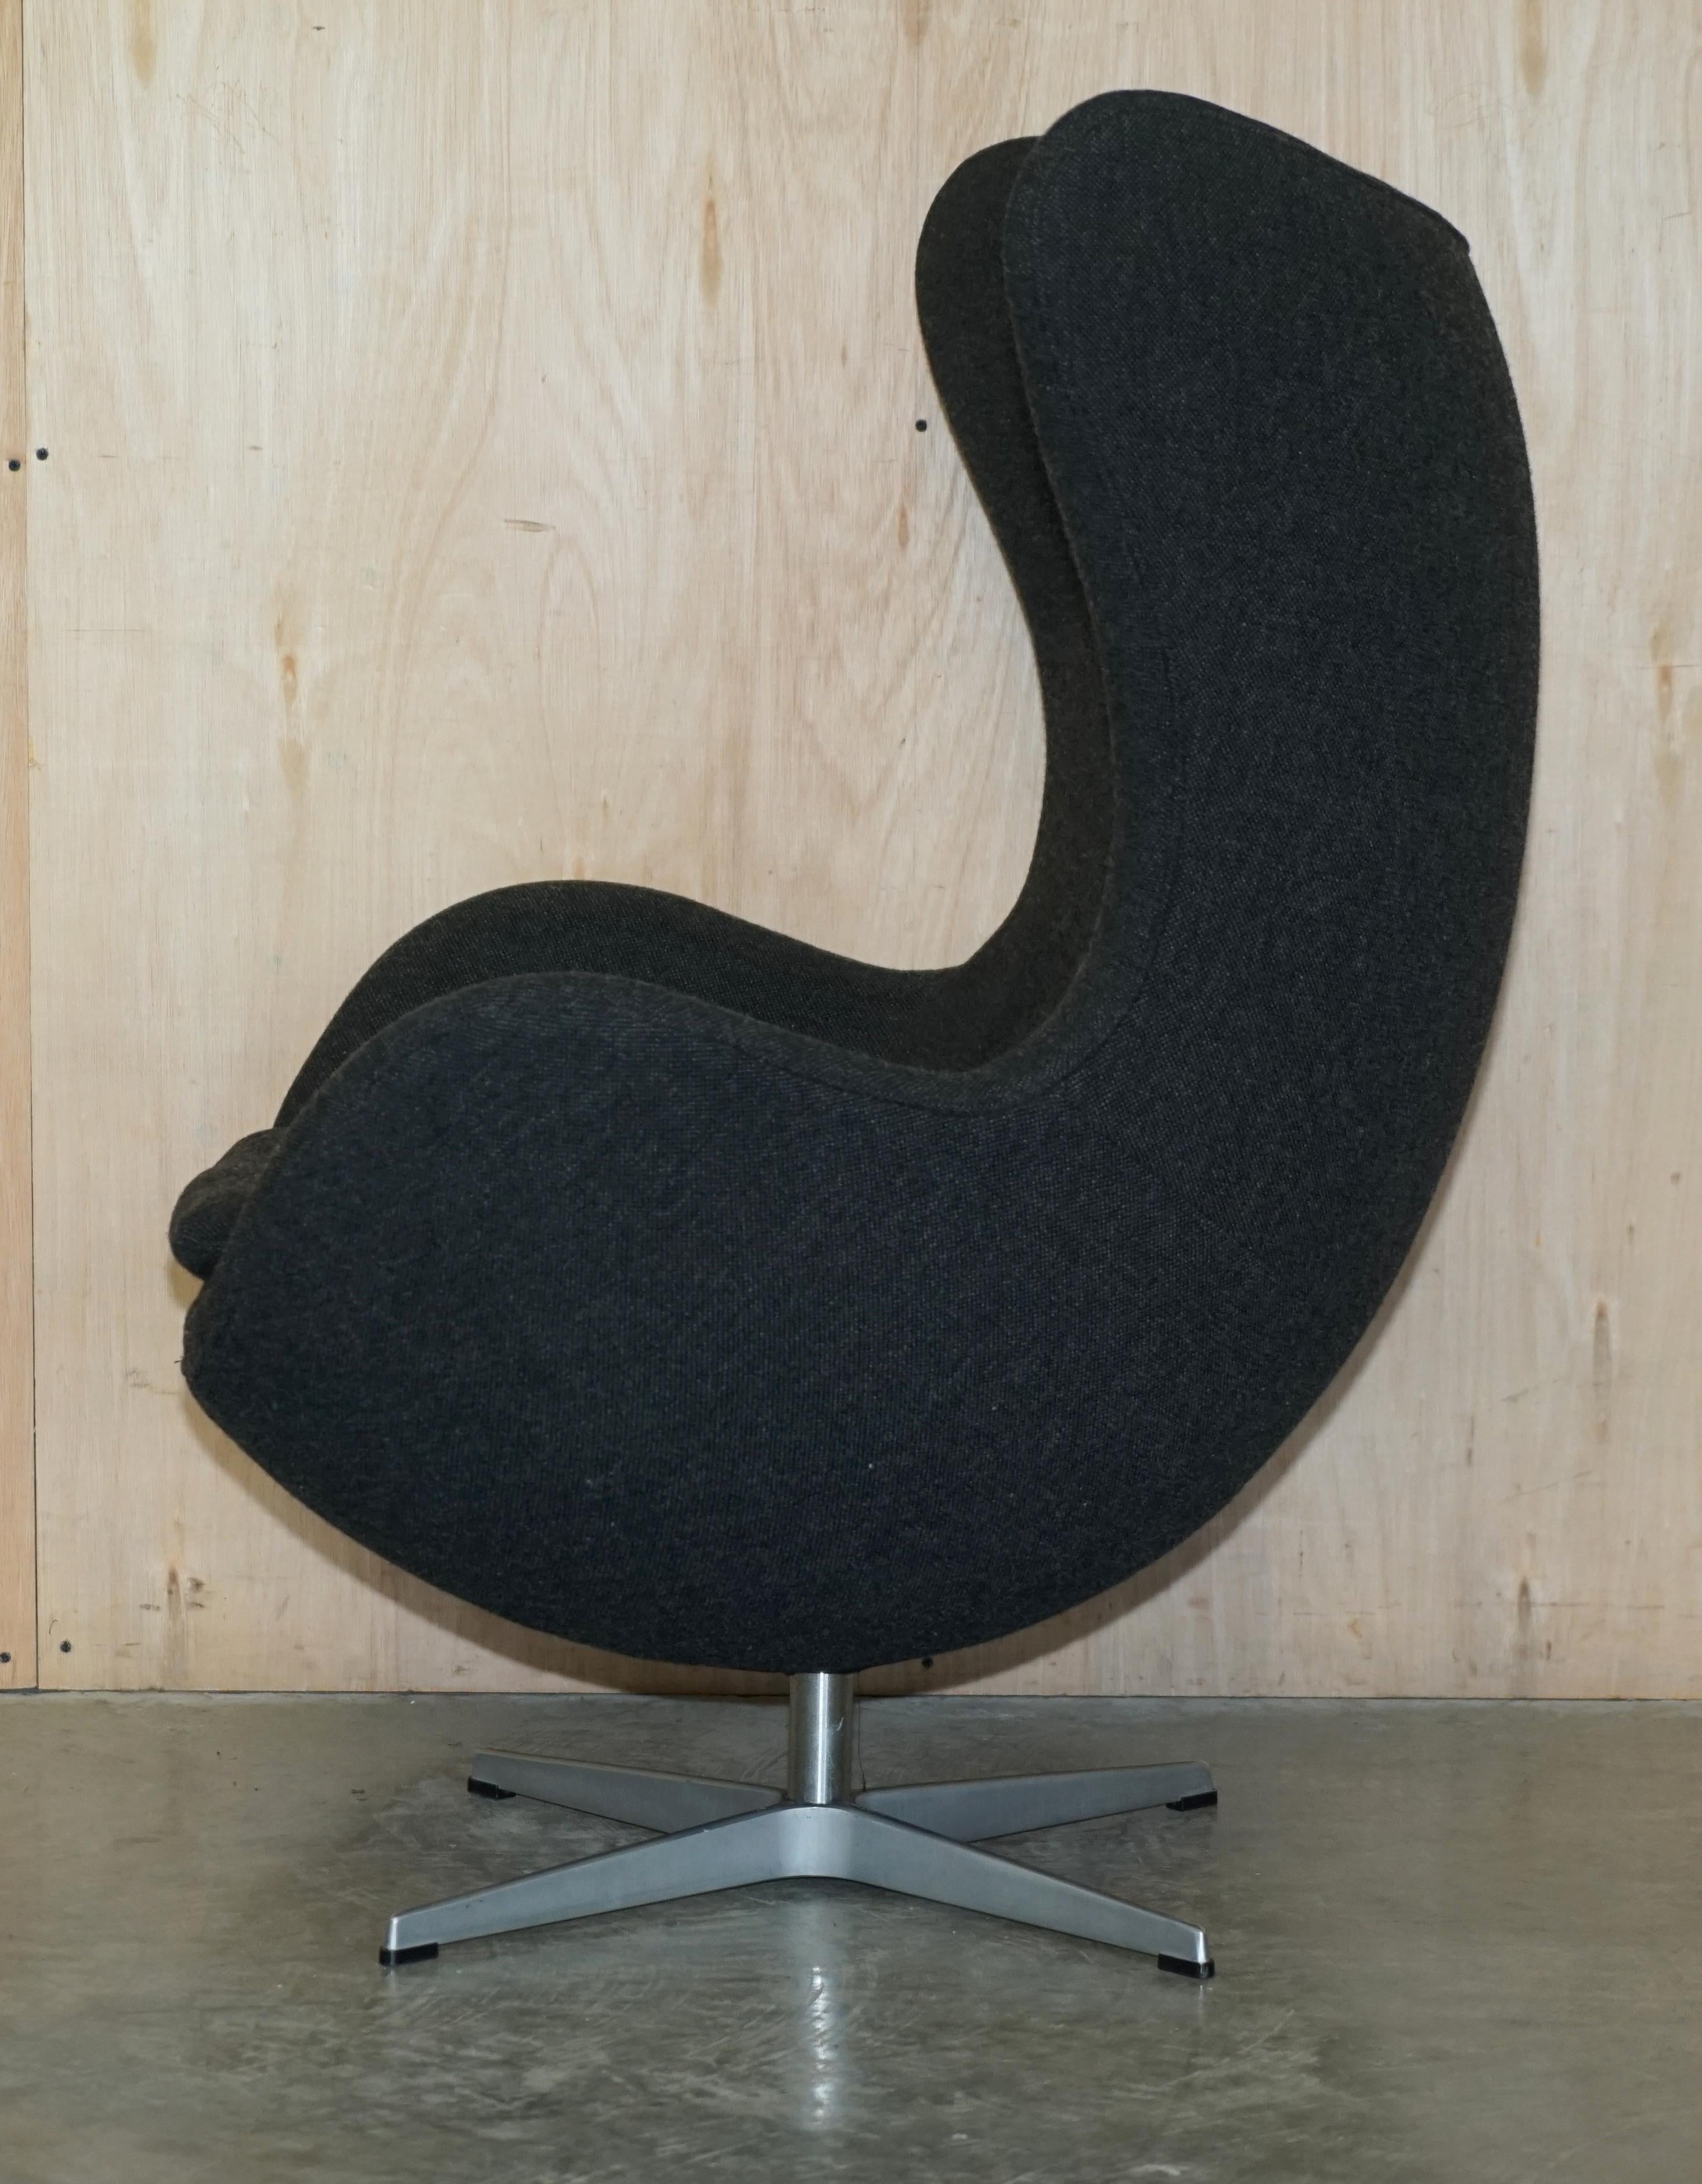 Original 1996 Stamped Fritz Hansen Egg Chair in Black / Grey Fabric For Sale 10